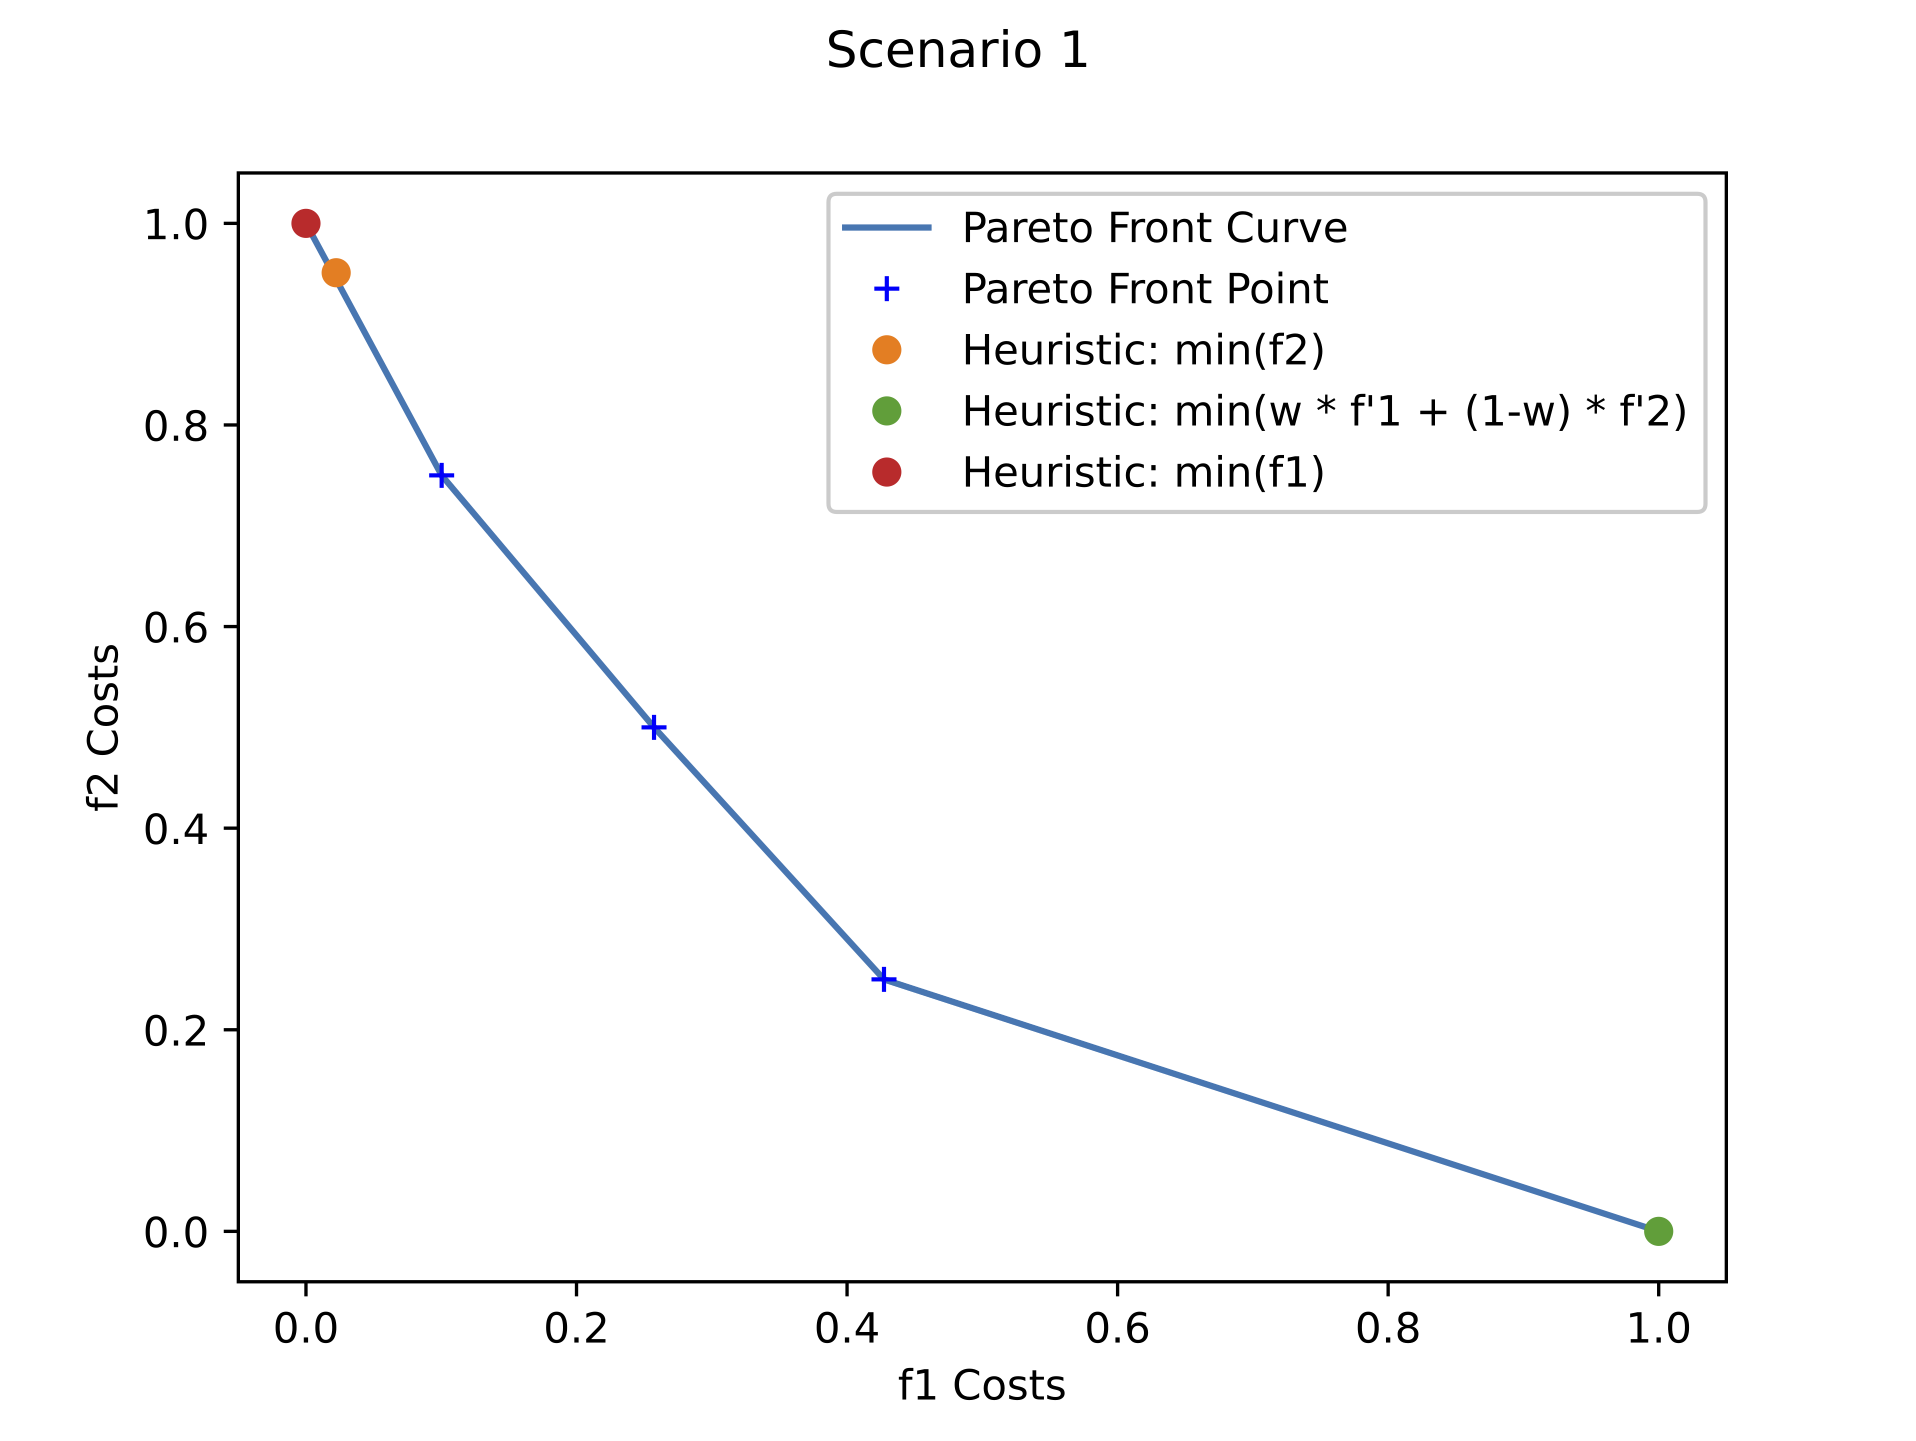 Pareto Fronts and Heuristic solutions for Scenario 1.